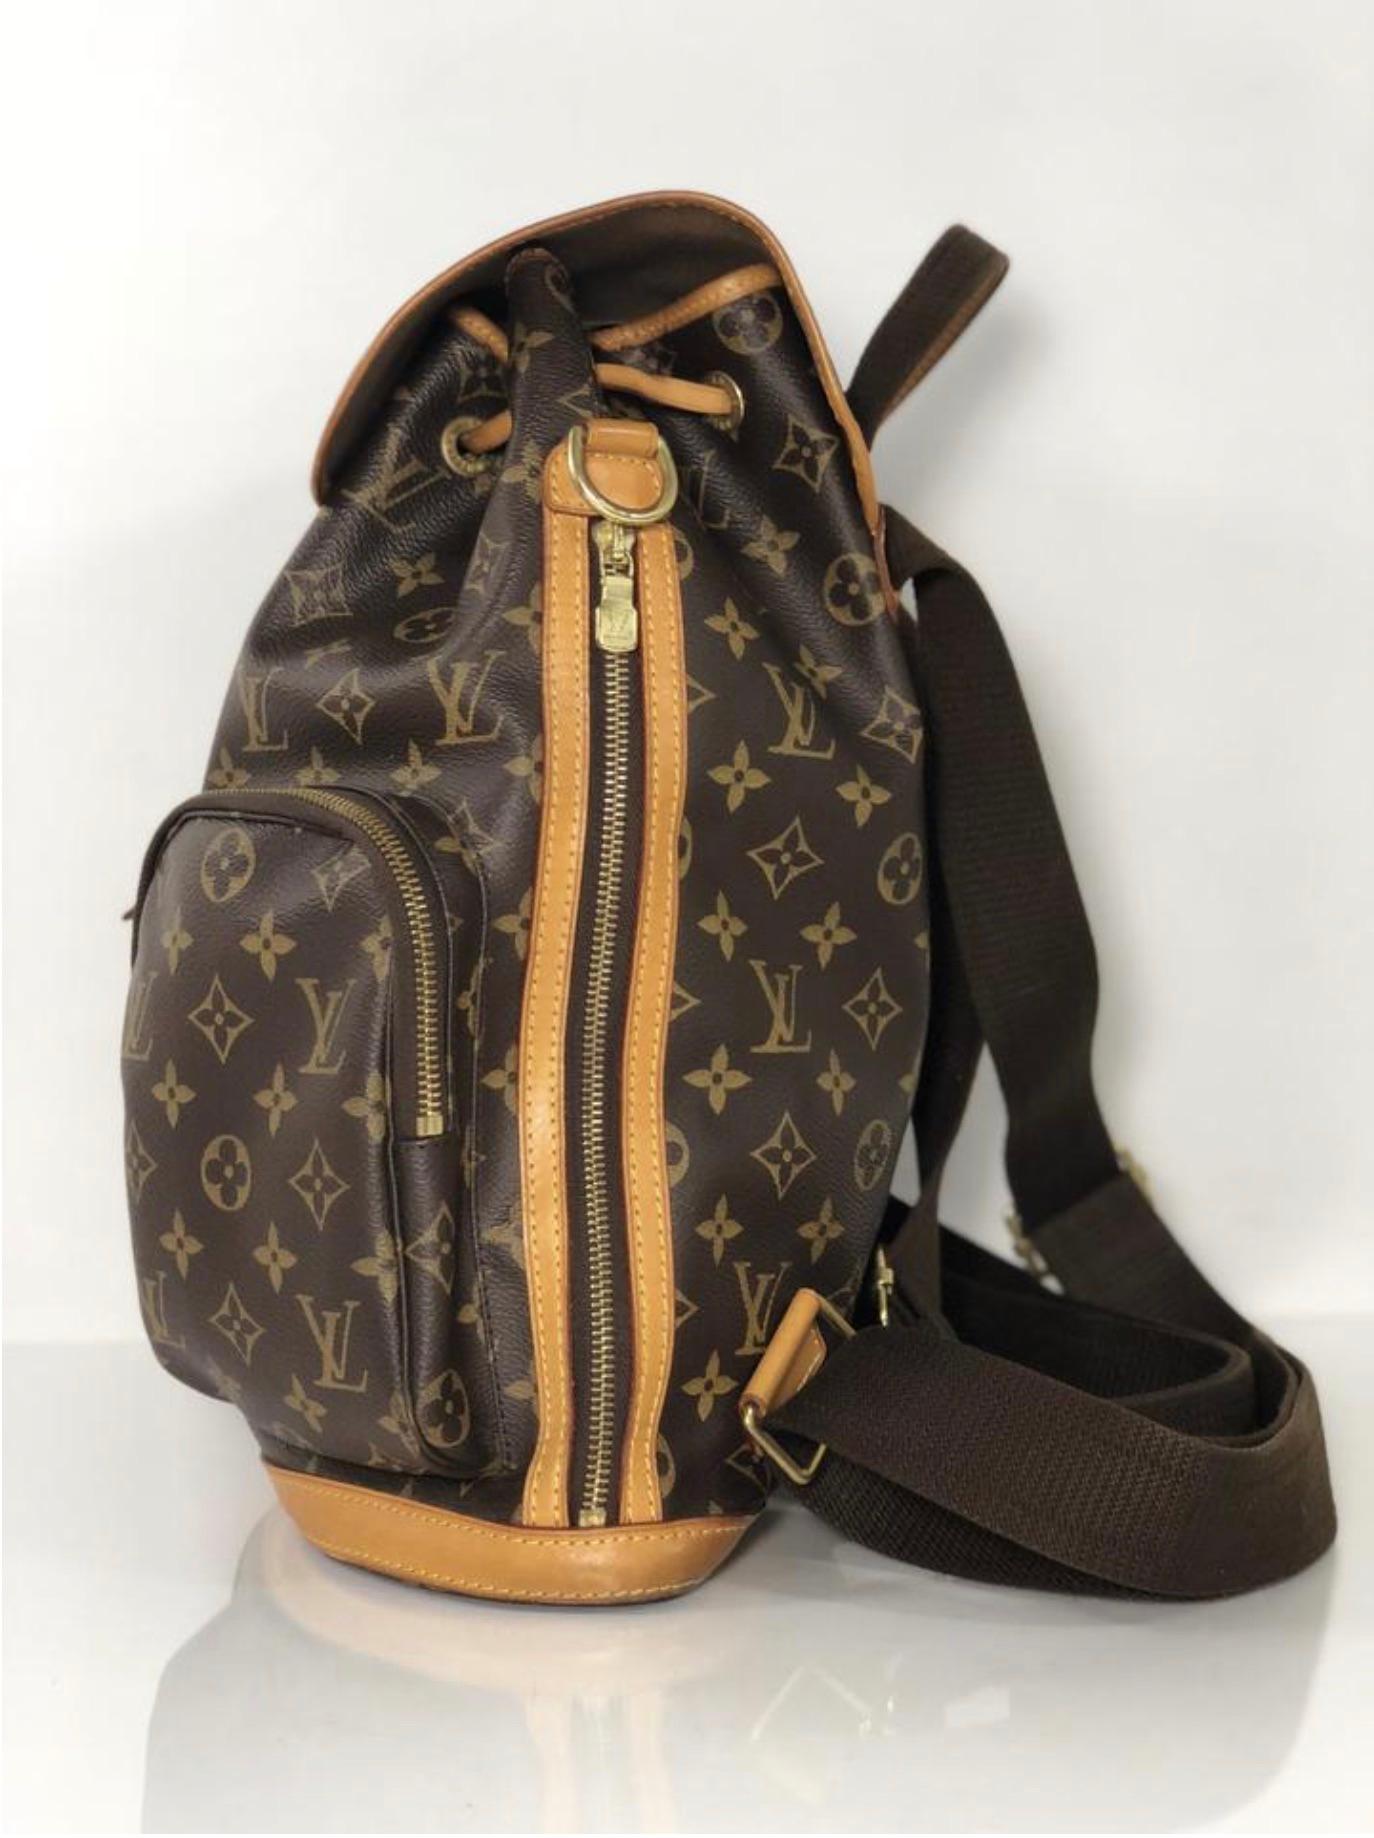 Louis Vuitton Monogram Bosphore Backpack Shoulder Handbag In Good Condition For Sale In Saint Charles, IL